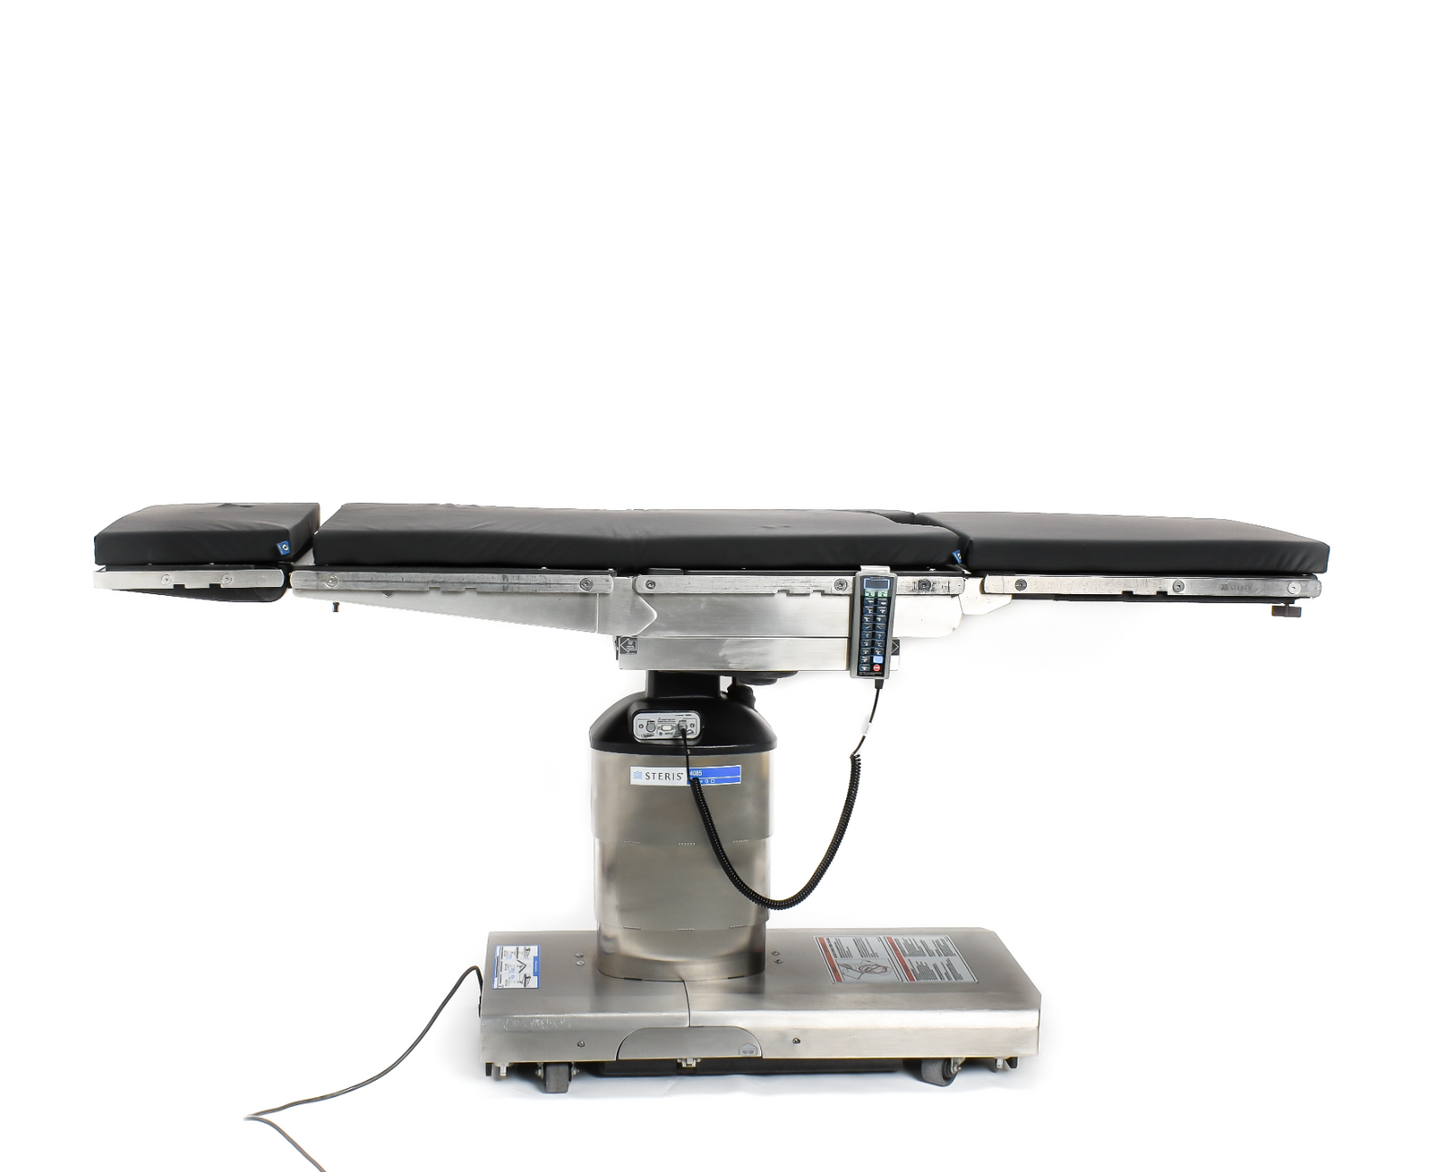 Steris 4085 General Surgical Table with Hand Control